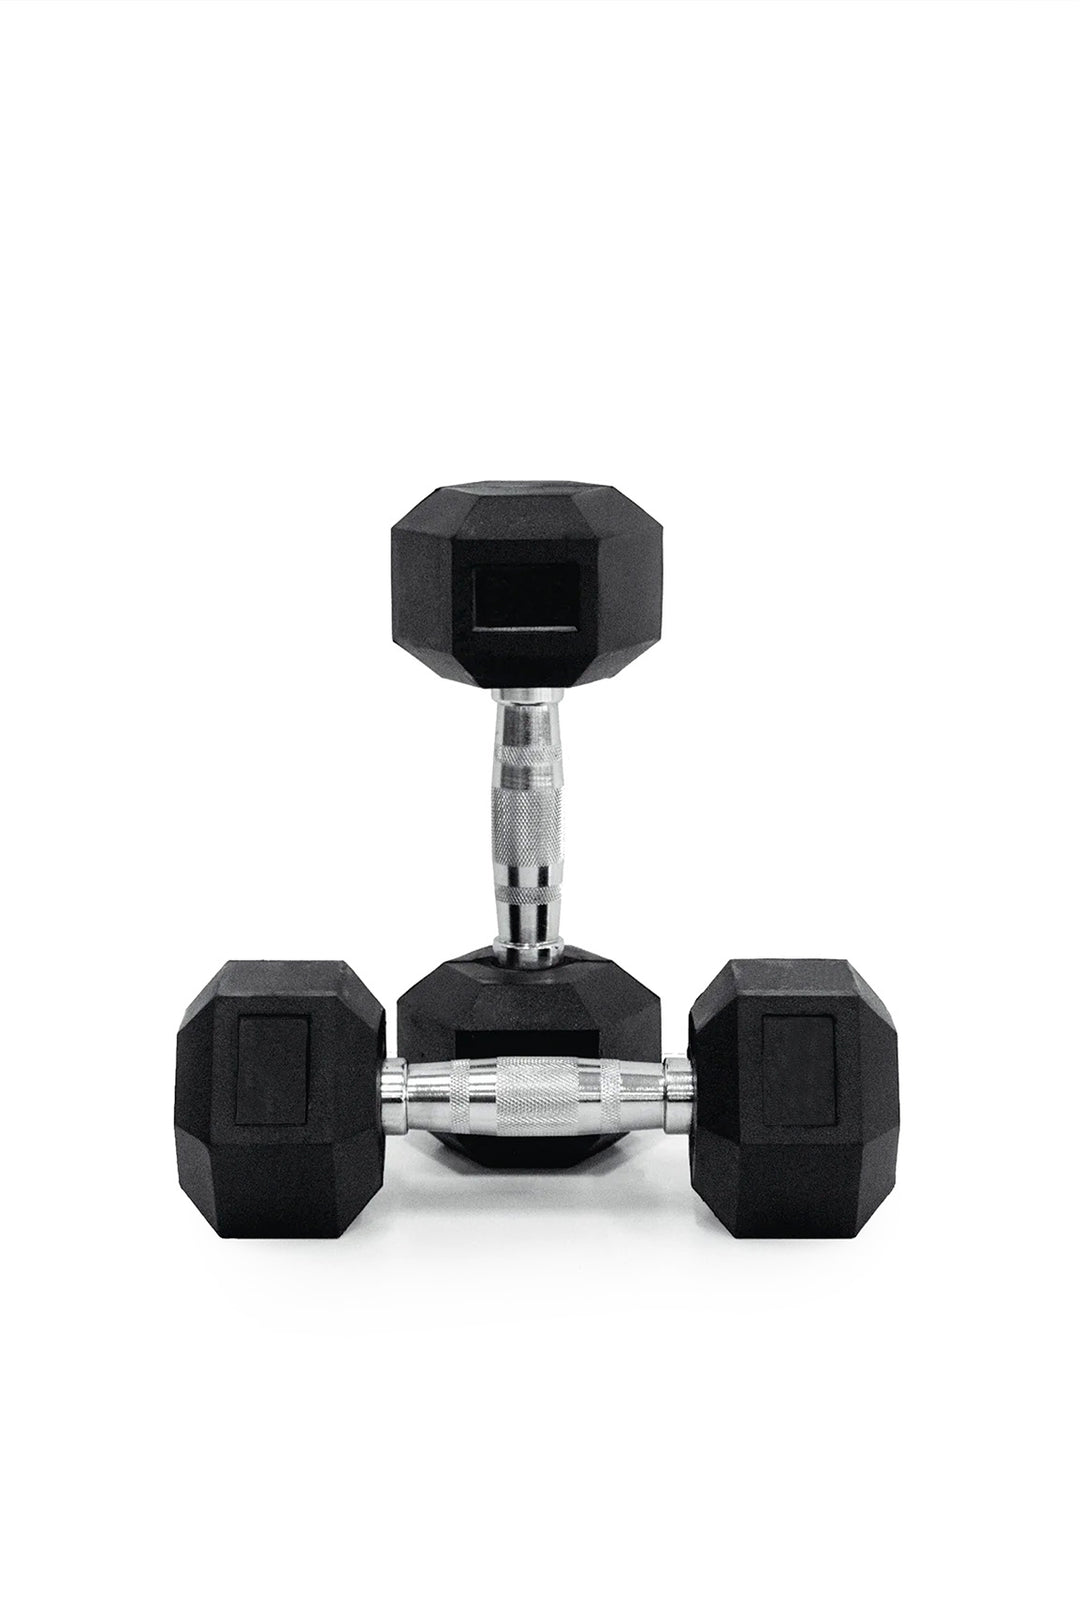 1kg Body Iron Commercial Rubber Hex Dumbbell Pair